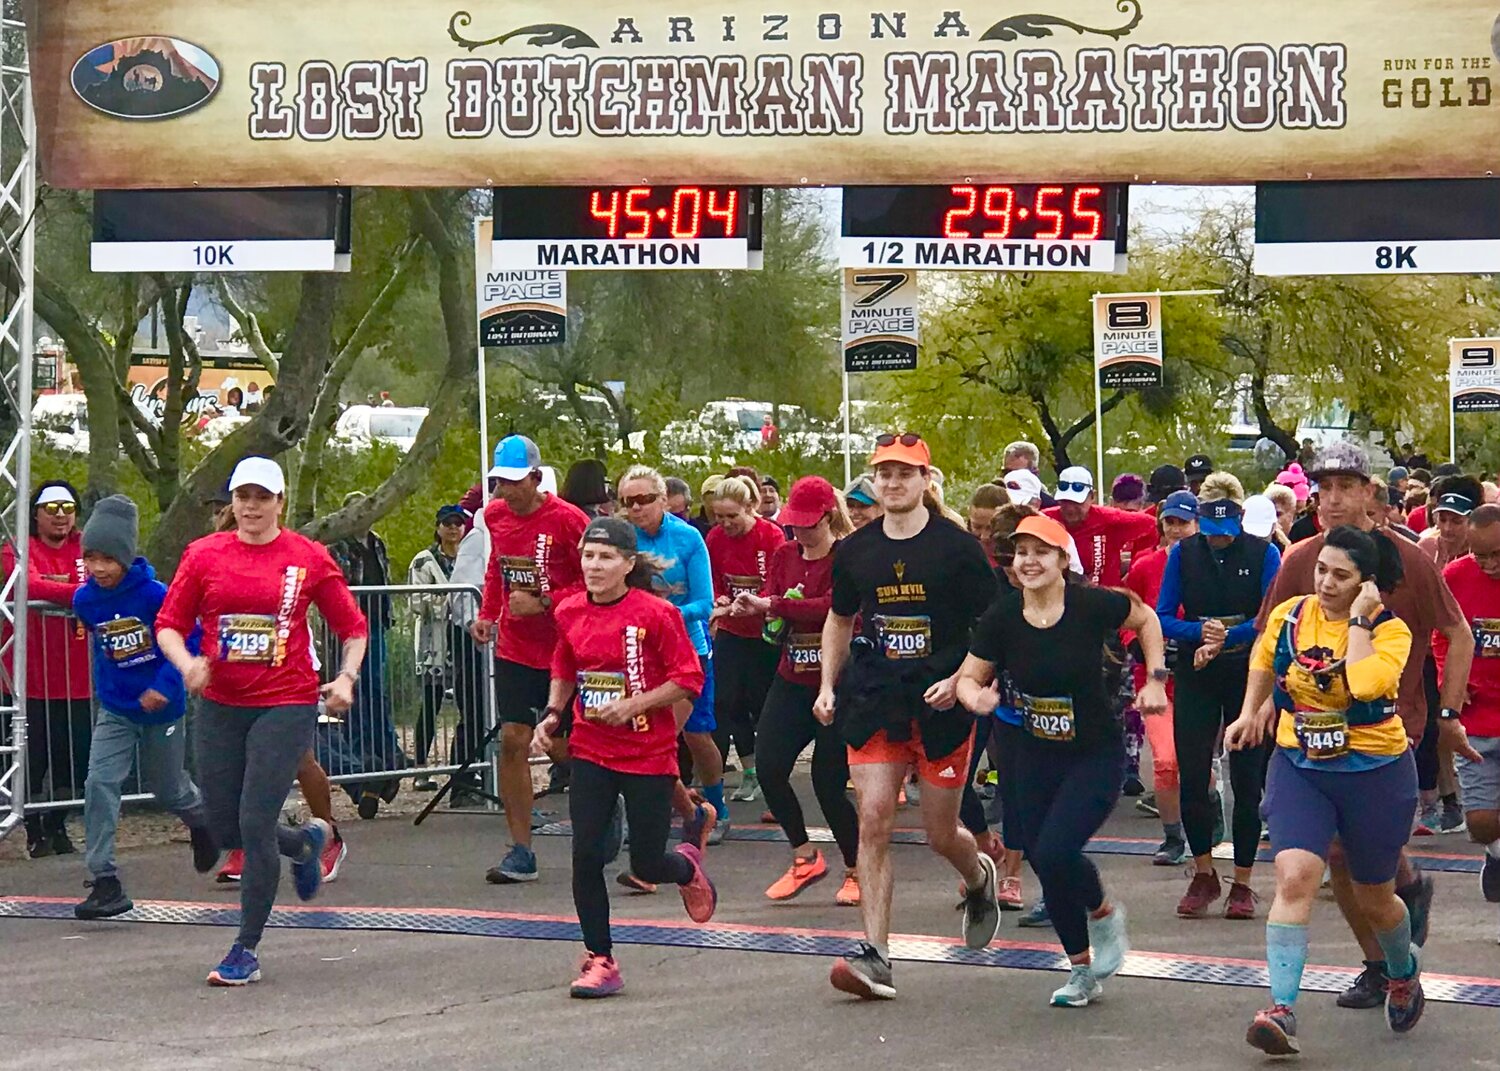 Those interested in running or walking in any of the available events will find detailed information and registration forms at the Lost Dutchman race website, lostdutchmanmarathon.org.